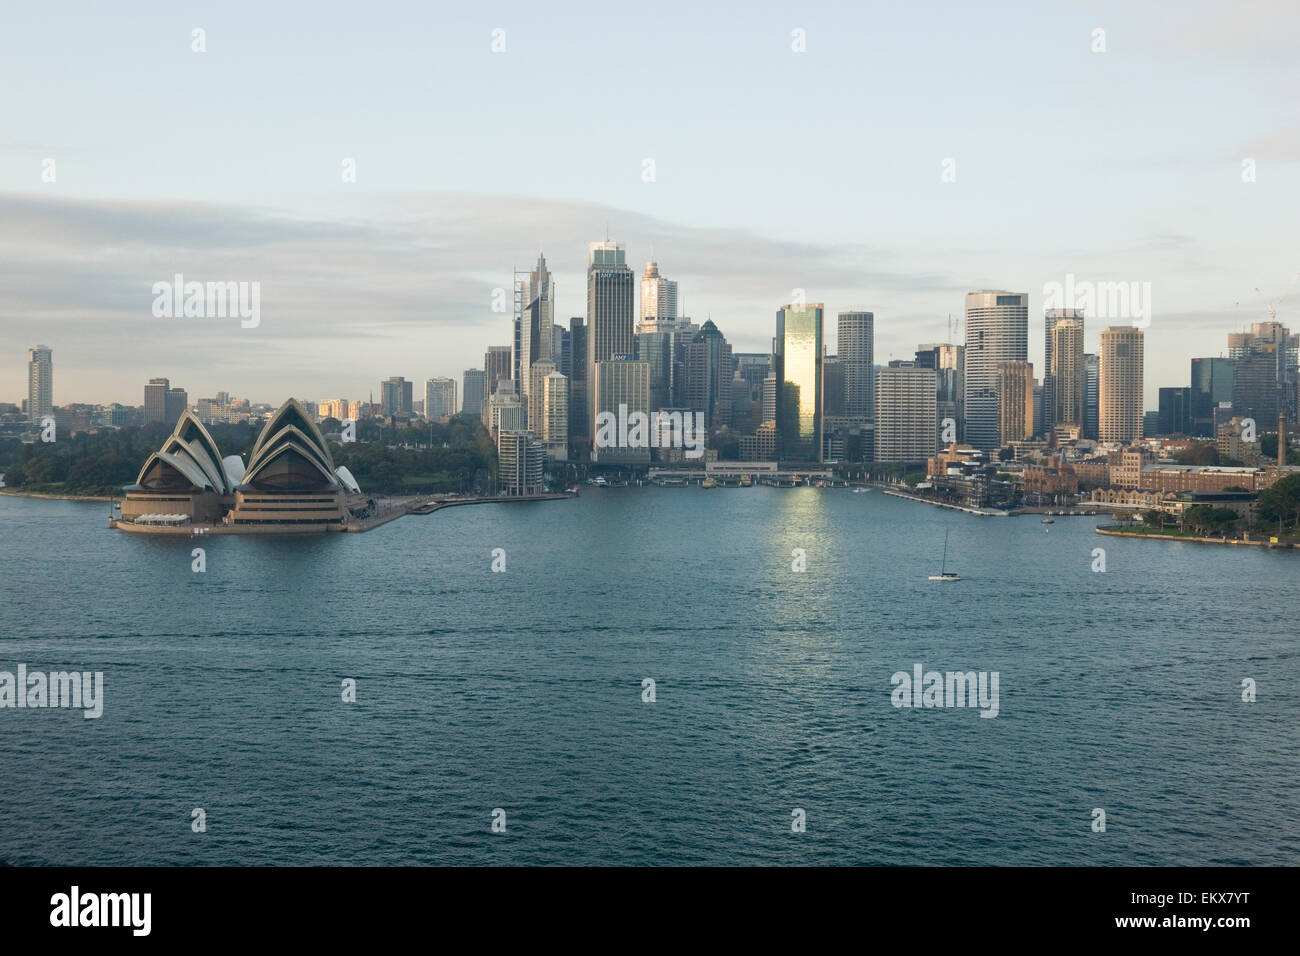 View of Sydney skyline and harbour including The Sydney Opera House, Circular Quay with office blocks that make up the cityscape Stock Photo